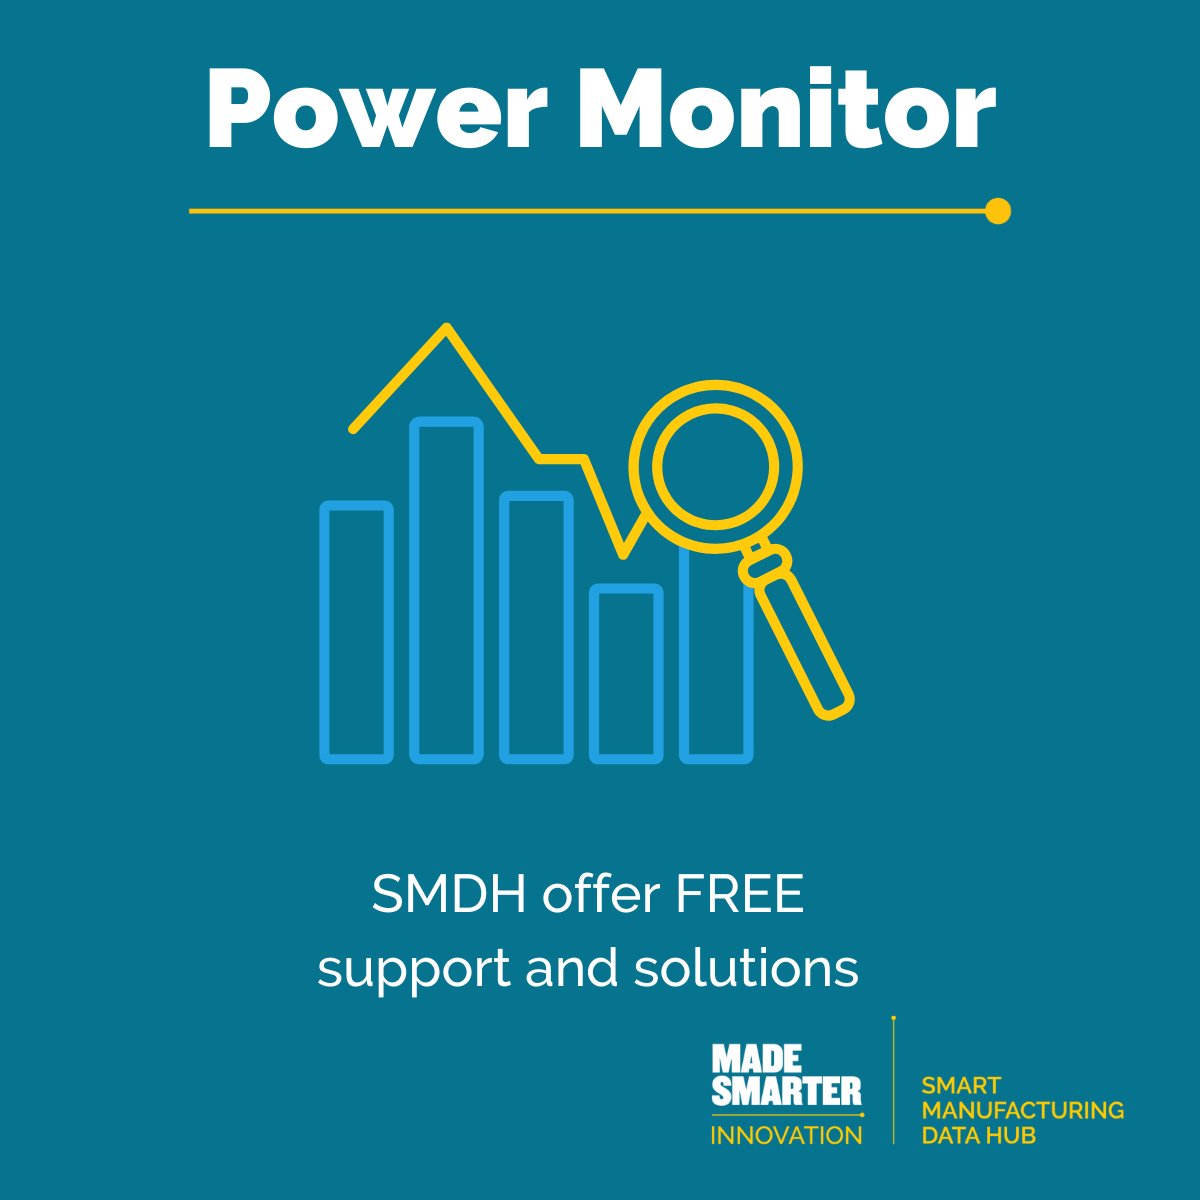 Apply for a FREE IoT Sensor Solution and support from SMDH🌠

Power Monitoring means No more guesswork! 
Track your electricity usage on a range of machinery, with a power monitor from SMDH.🔌
Apply here: eu1.hubs.ly/H07zqWf0

#IoT #PowerMonitor #IoTsensors